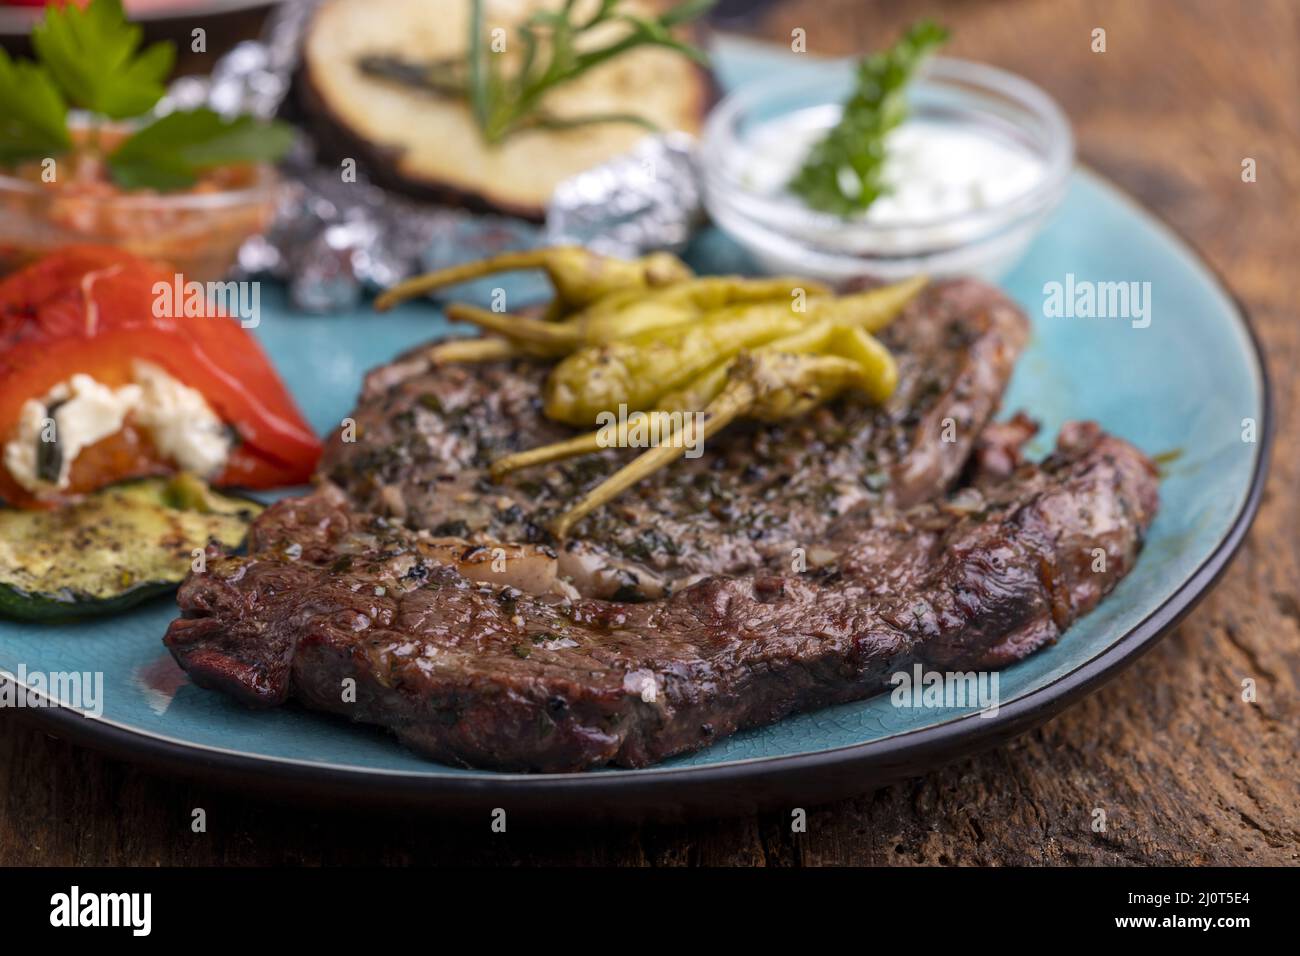 Grilled steak with potatoes on wood Stock Photo